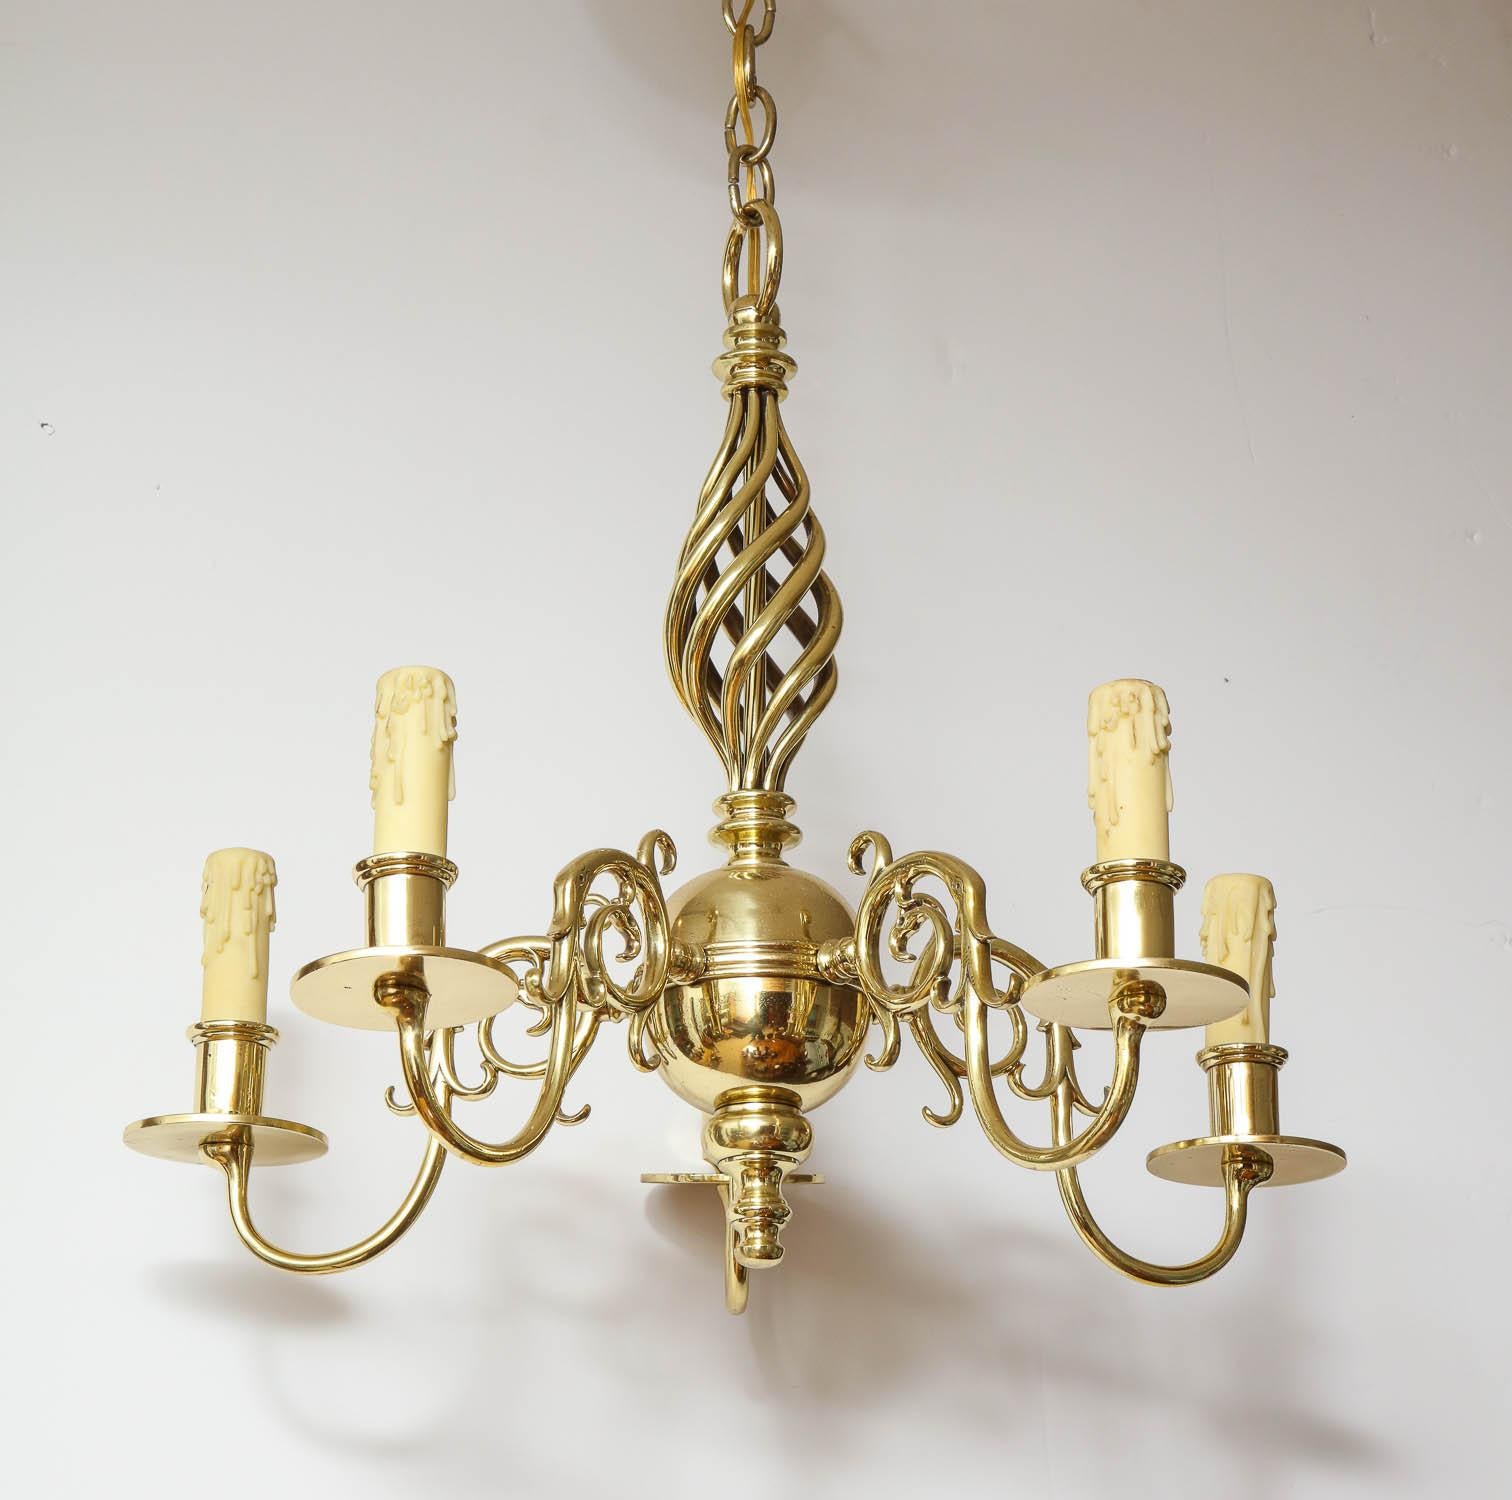 Fine 1930s brass five-light chandelier with open spiral fluted shaft over ringed ball, the five scrolled arms with cylindrical candle sockets and disc drip pans, recently rewired and polished.